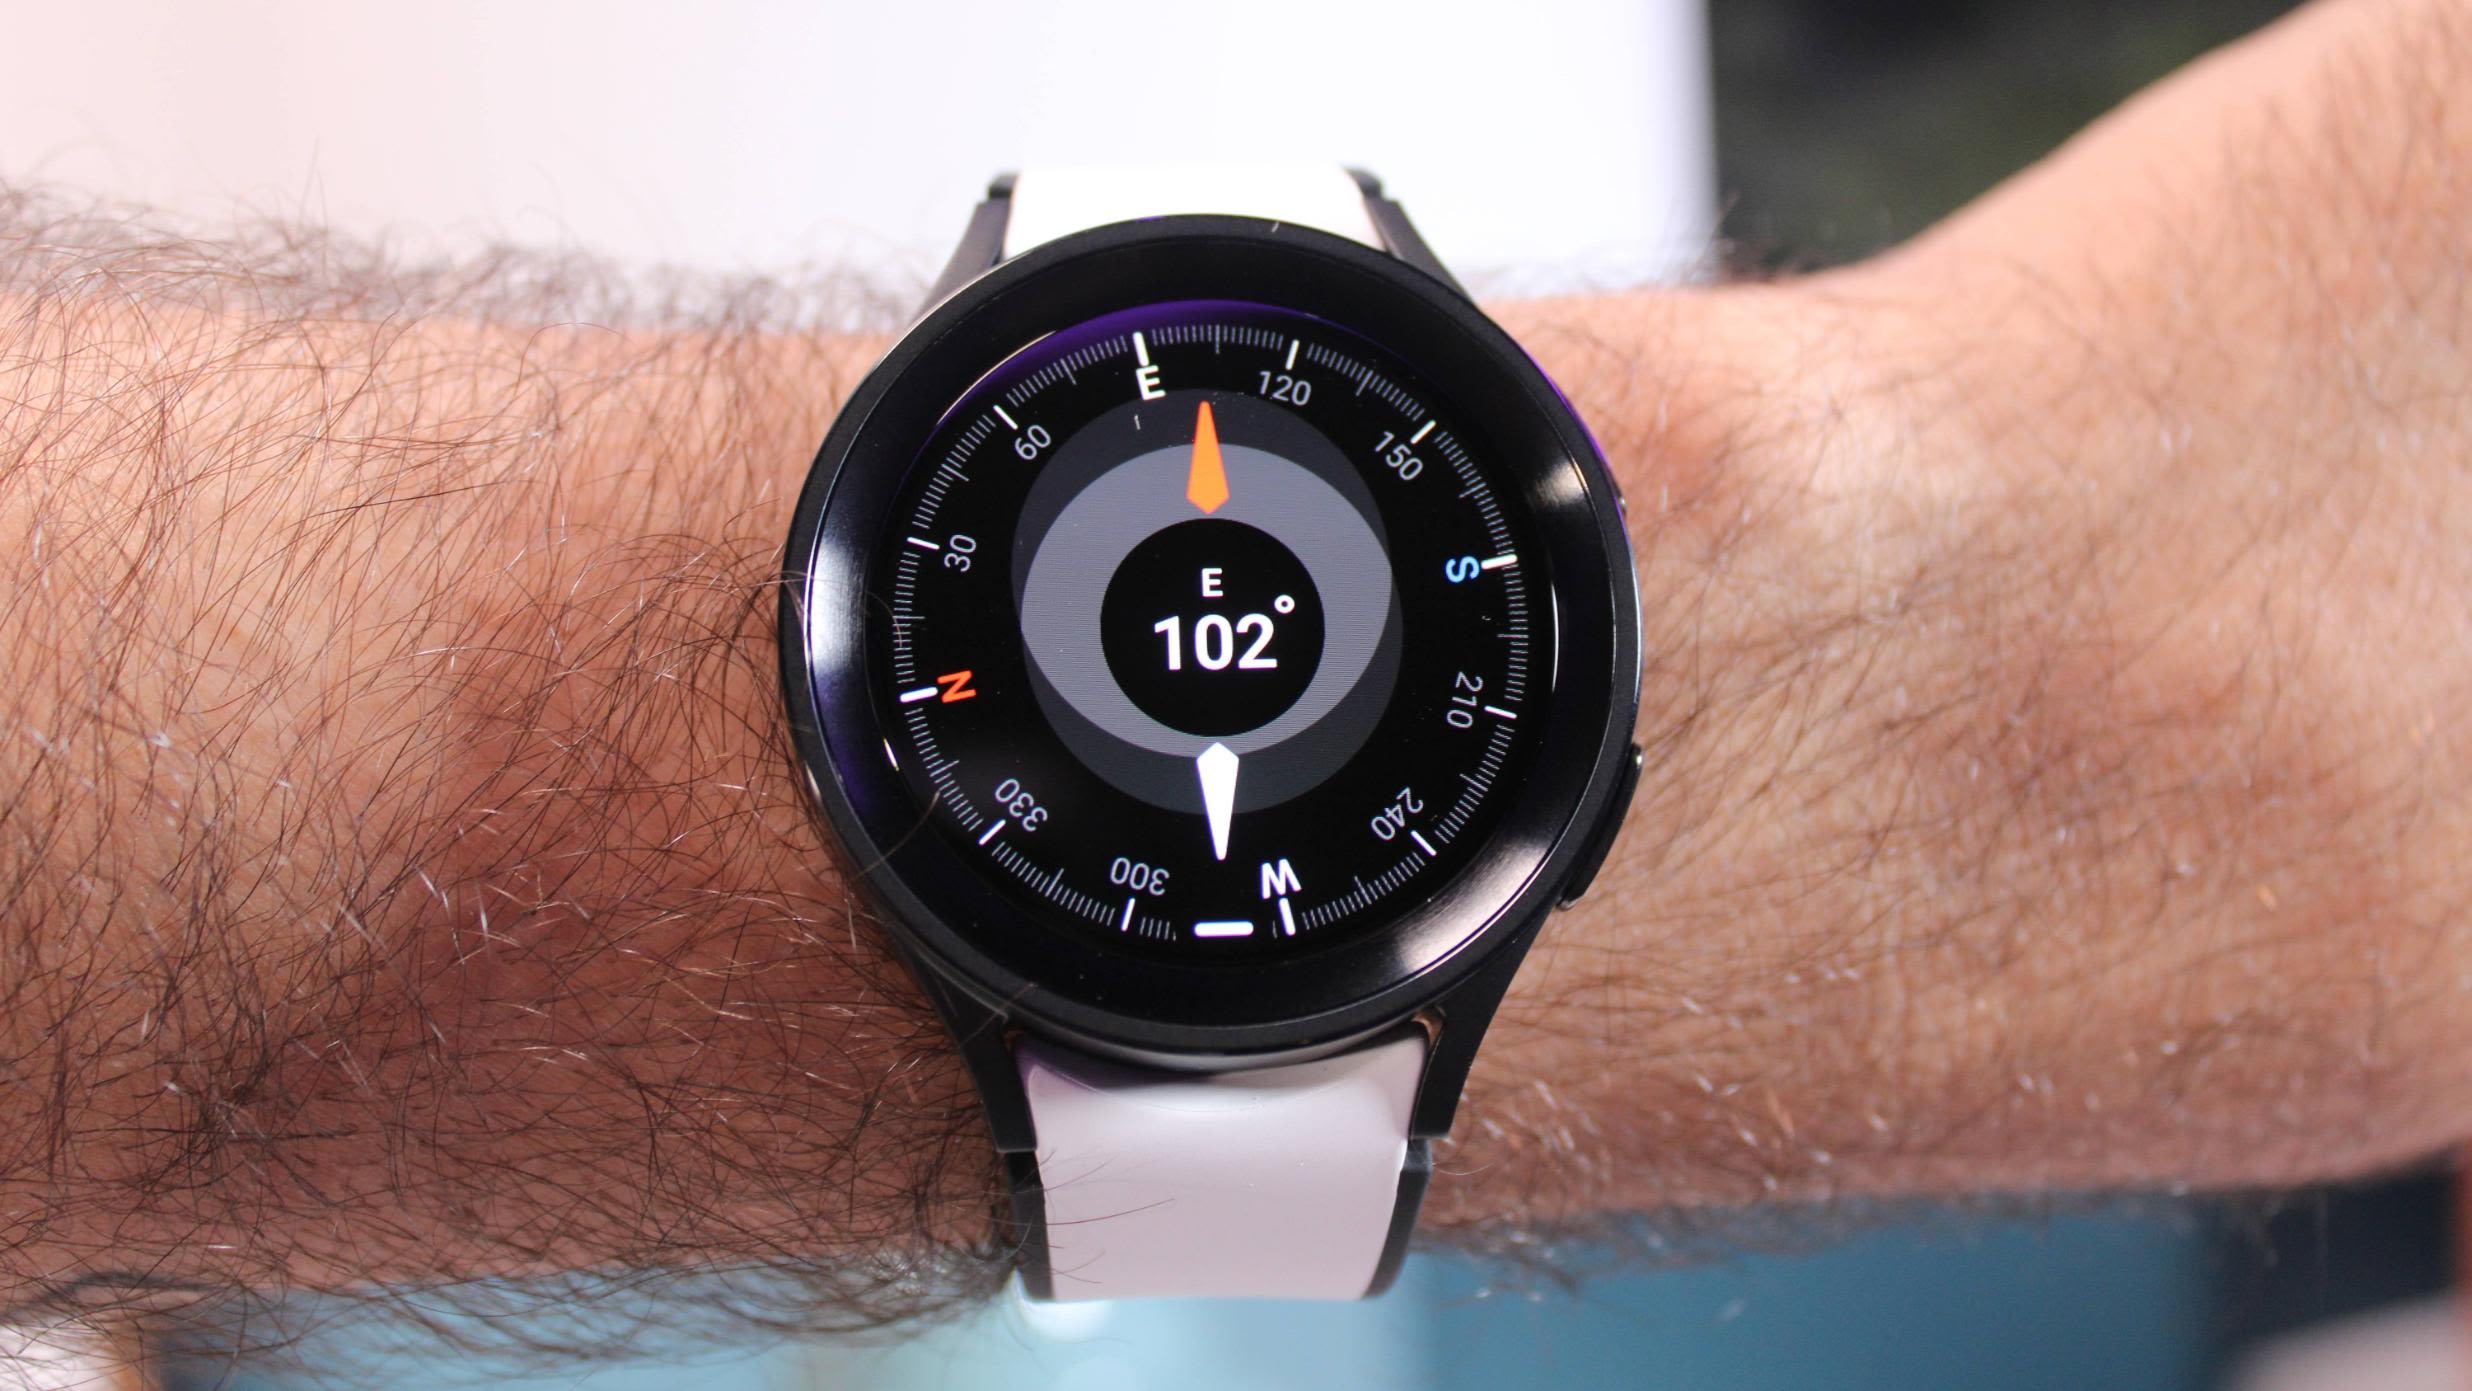 Samsung Galaxy Watch 5: Price, Release Date, Specs, and Preorder